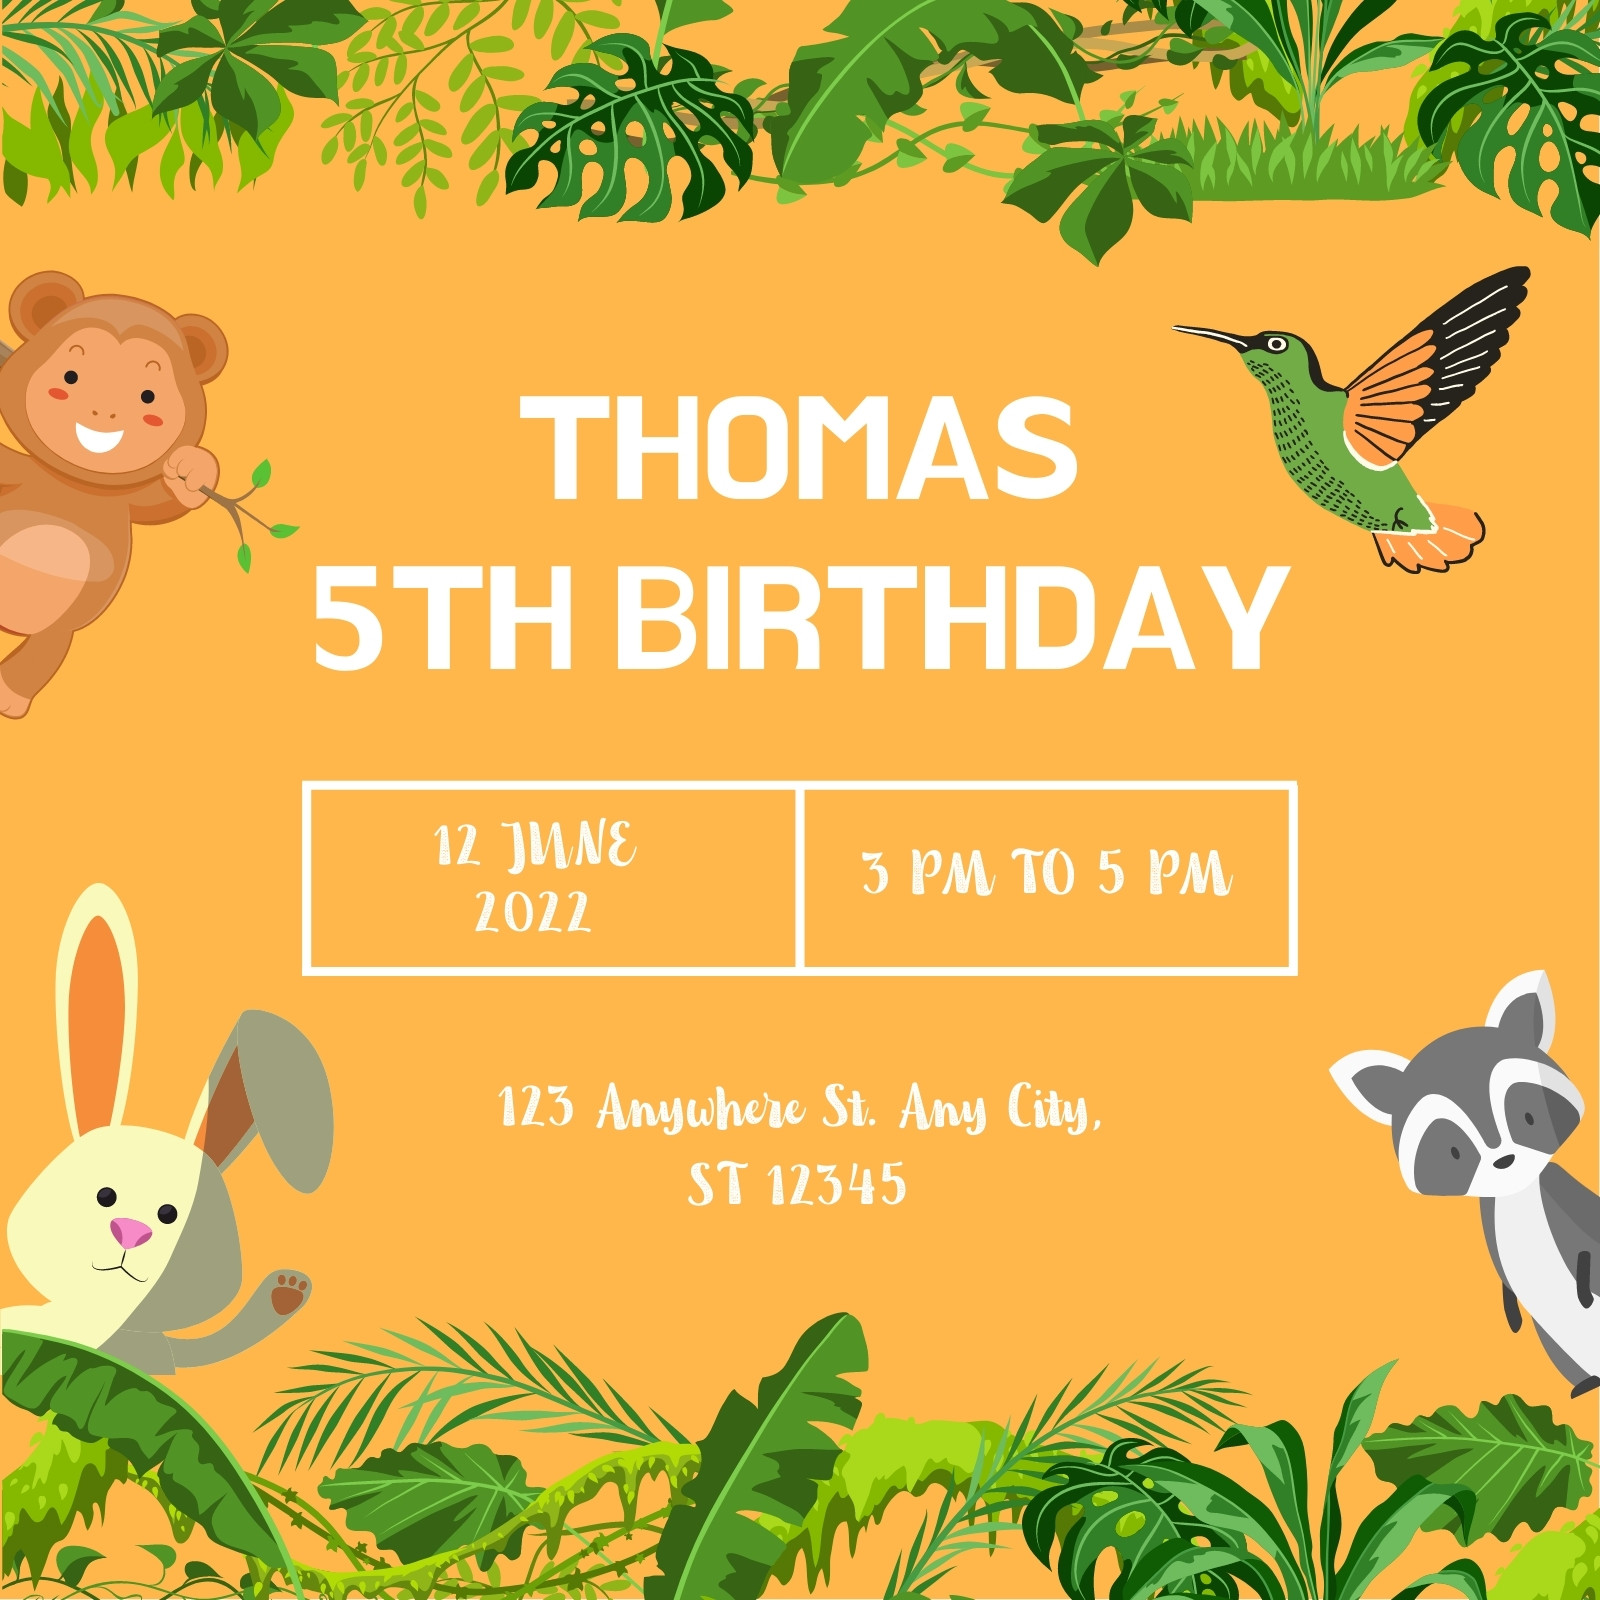 Page 8 - Free, printable, editable kids party invitation templates | Canva